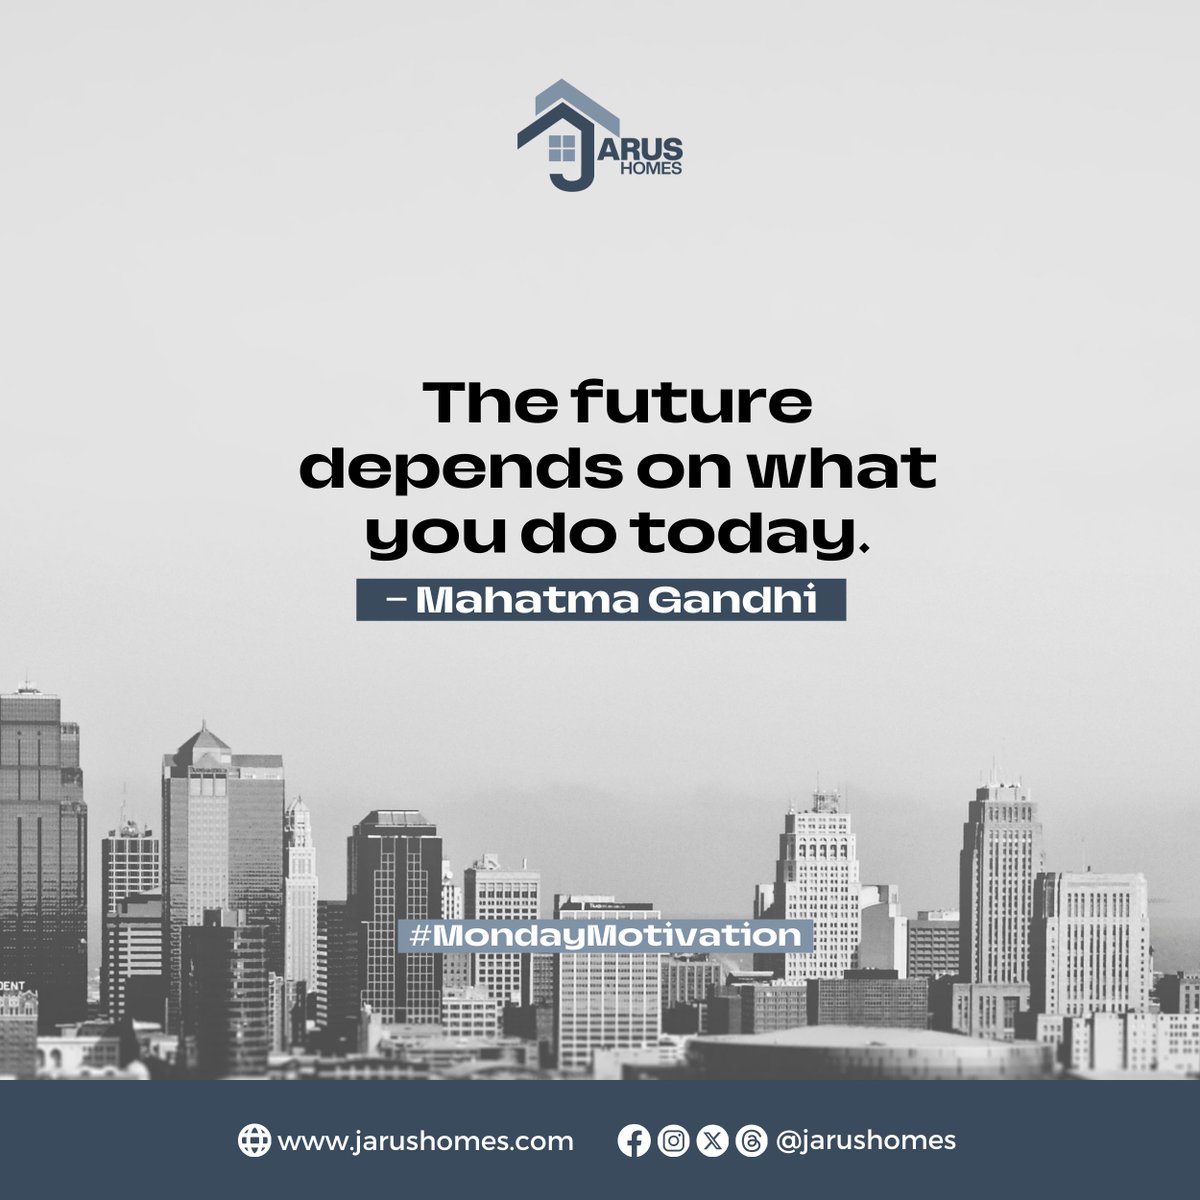 Take the first step today, the future awaits it. #MondayMotivation #JarusHomes